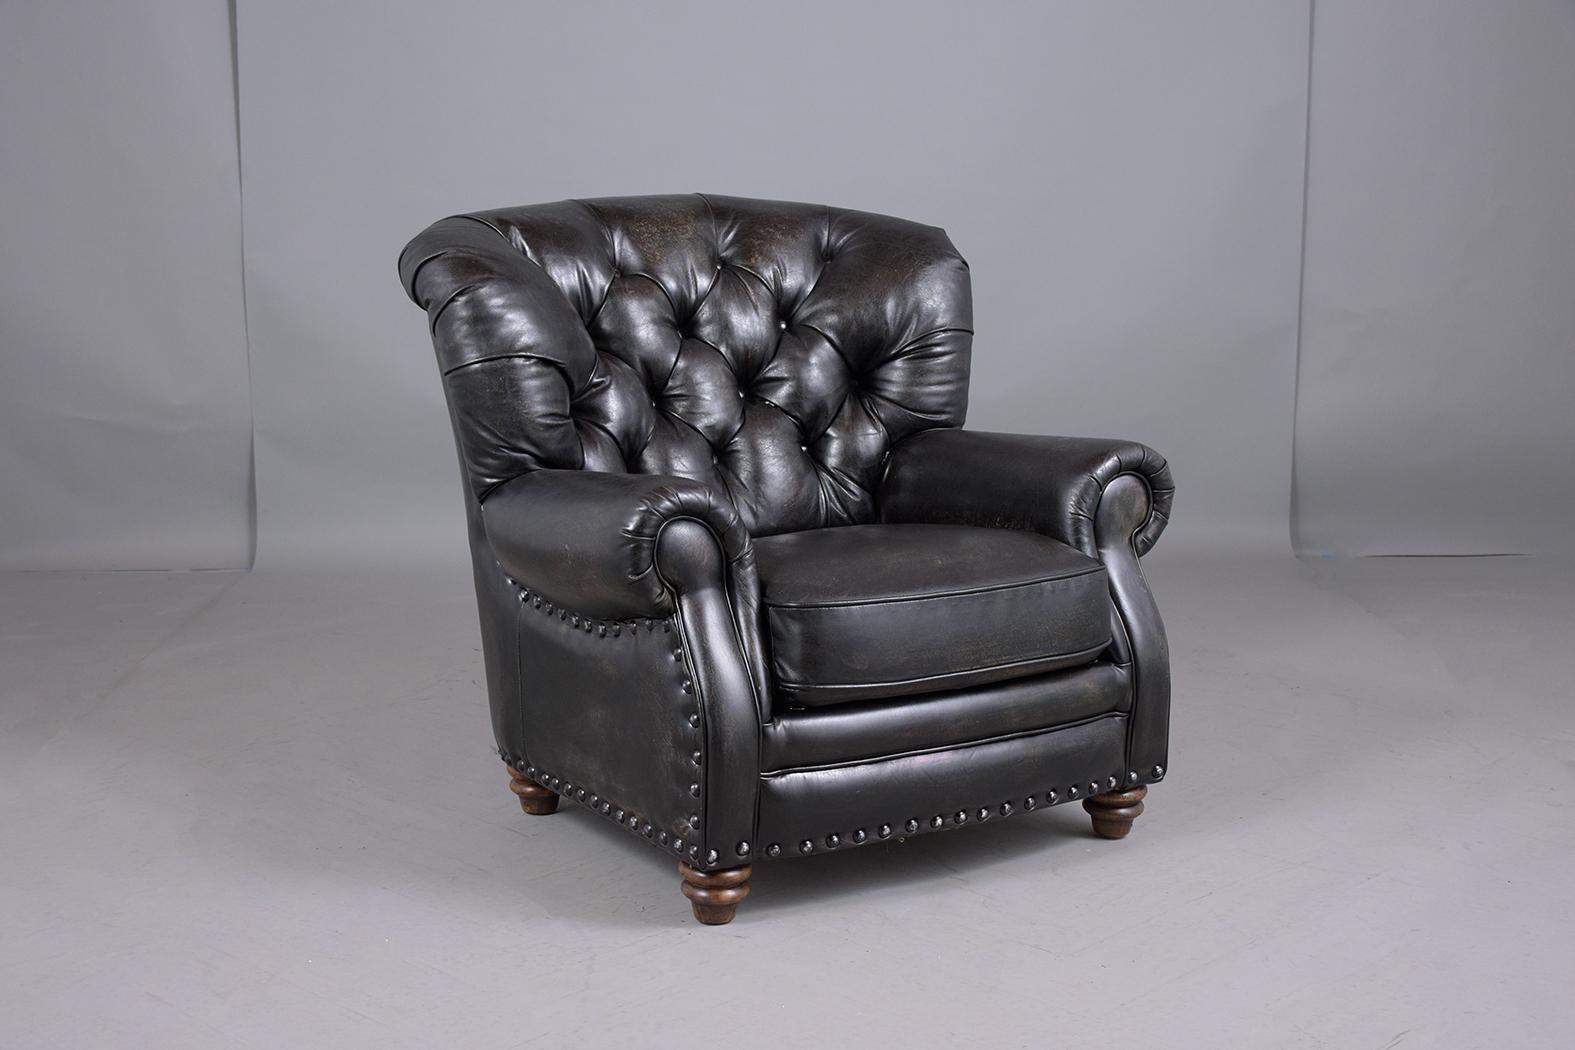 Polished Pair of Leather Chesterfield Chairs